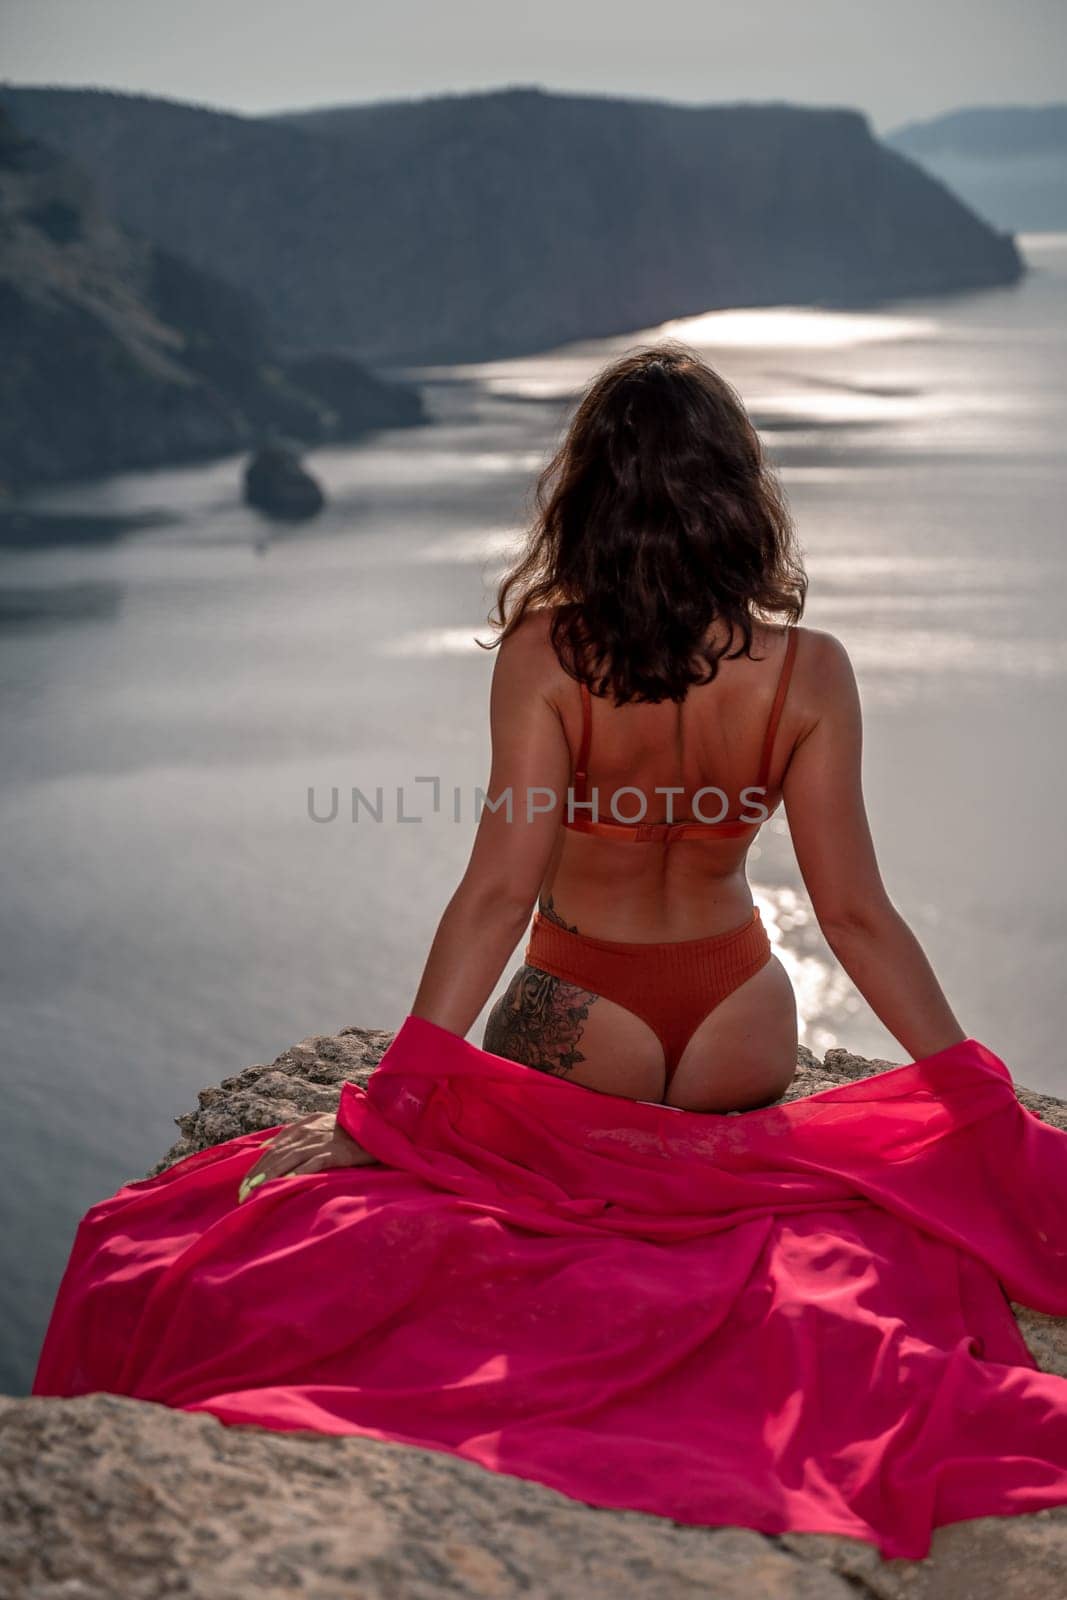 A woman in a red bikini is sitting on a rock overlooking a body of water. The scene is serene and peaceful, with the woman's body language conveying a sense of relaxation and contentment